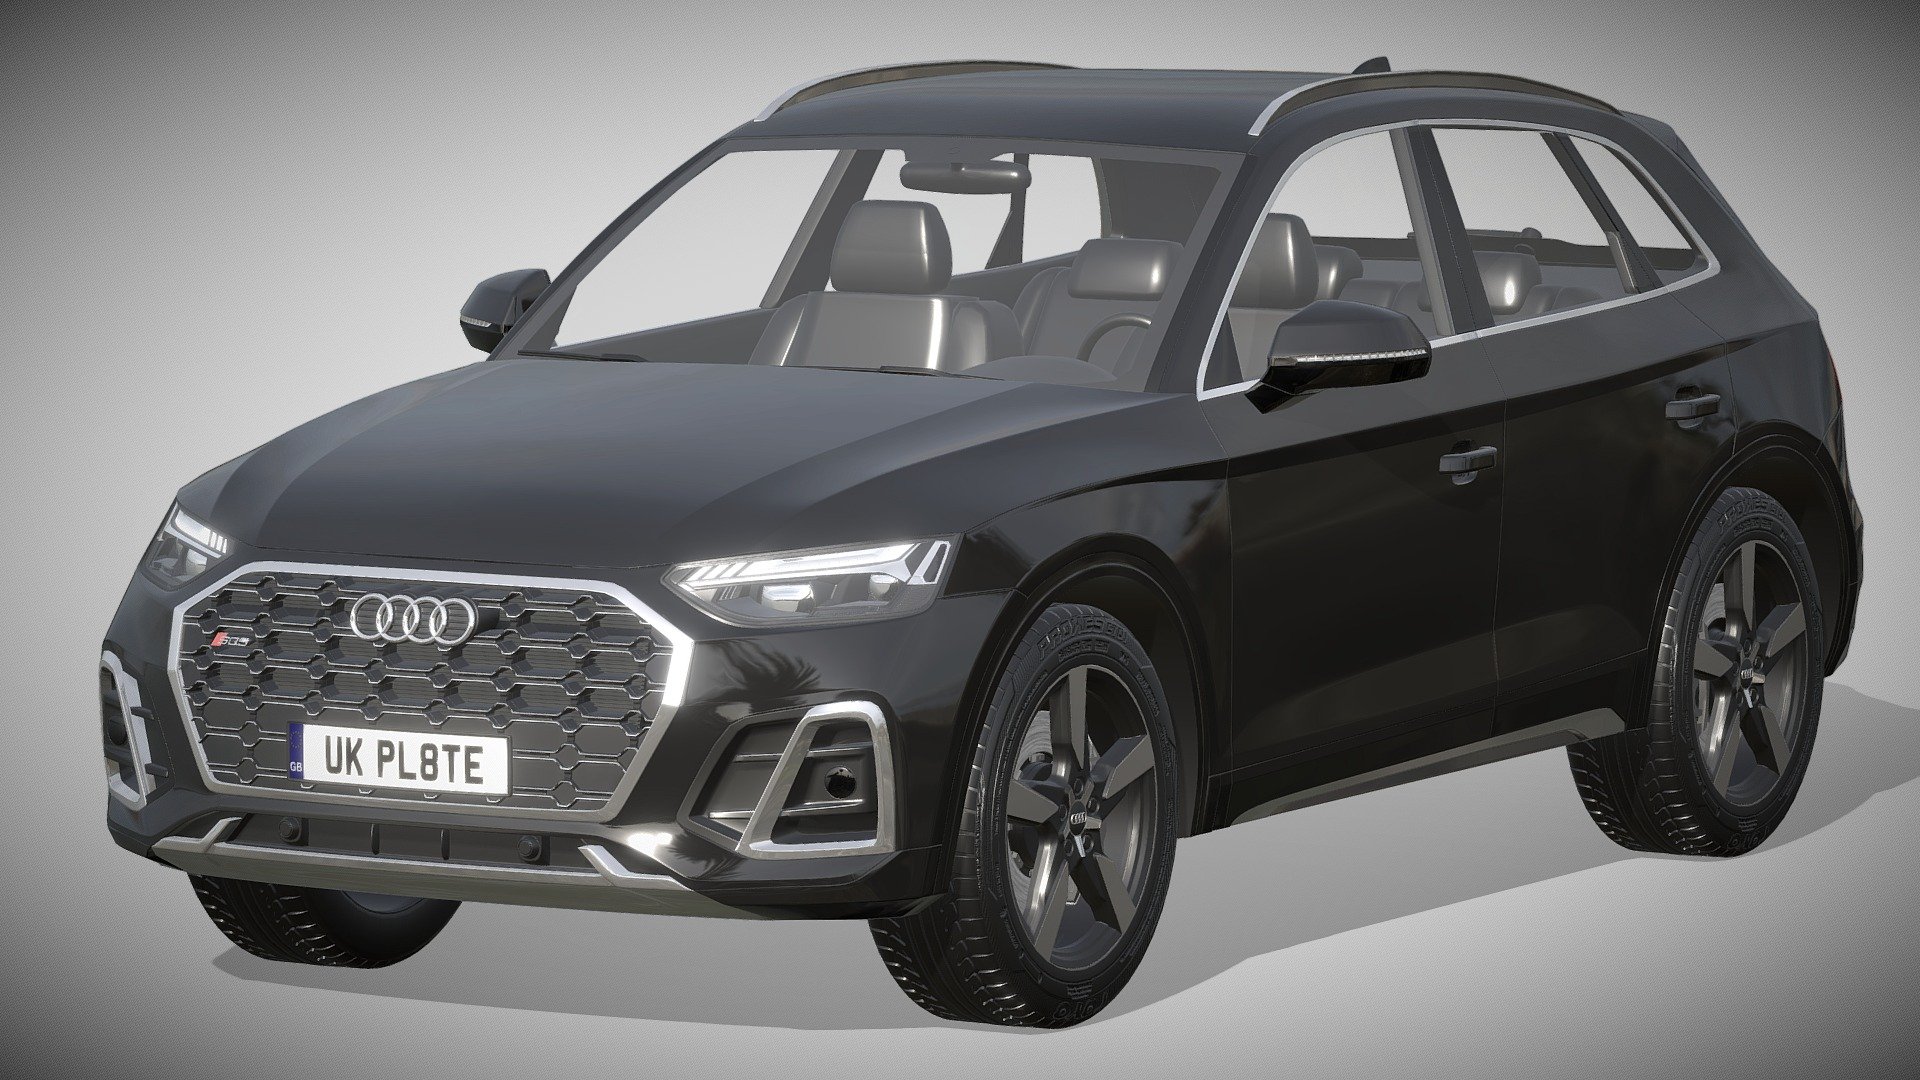 Audi SQ5 2021

https://www.audi.de/de/brand/de/neuwagen/q5/sq5.html

Clean geometry Light weight model, yet completely detailed for HI-Res renders. Use for movies, Advertisements or games

Corona render and materials

All textures include in *.rar files

Lighting setup is not included in the file! - Audi SQ5 2021 - Buy Royalty Free 3D model by zifir3d 3d model